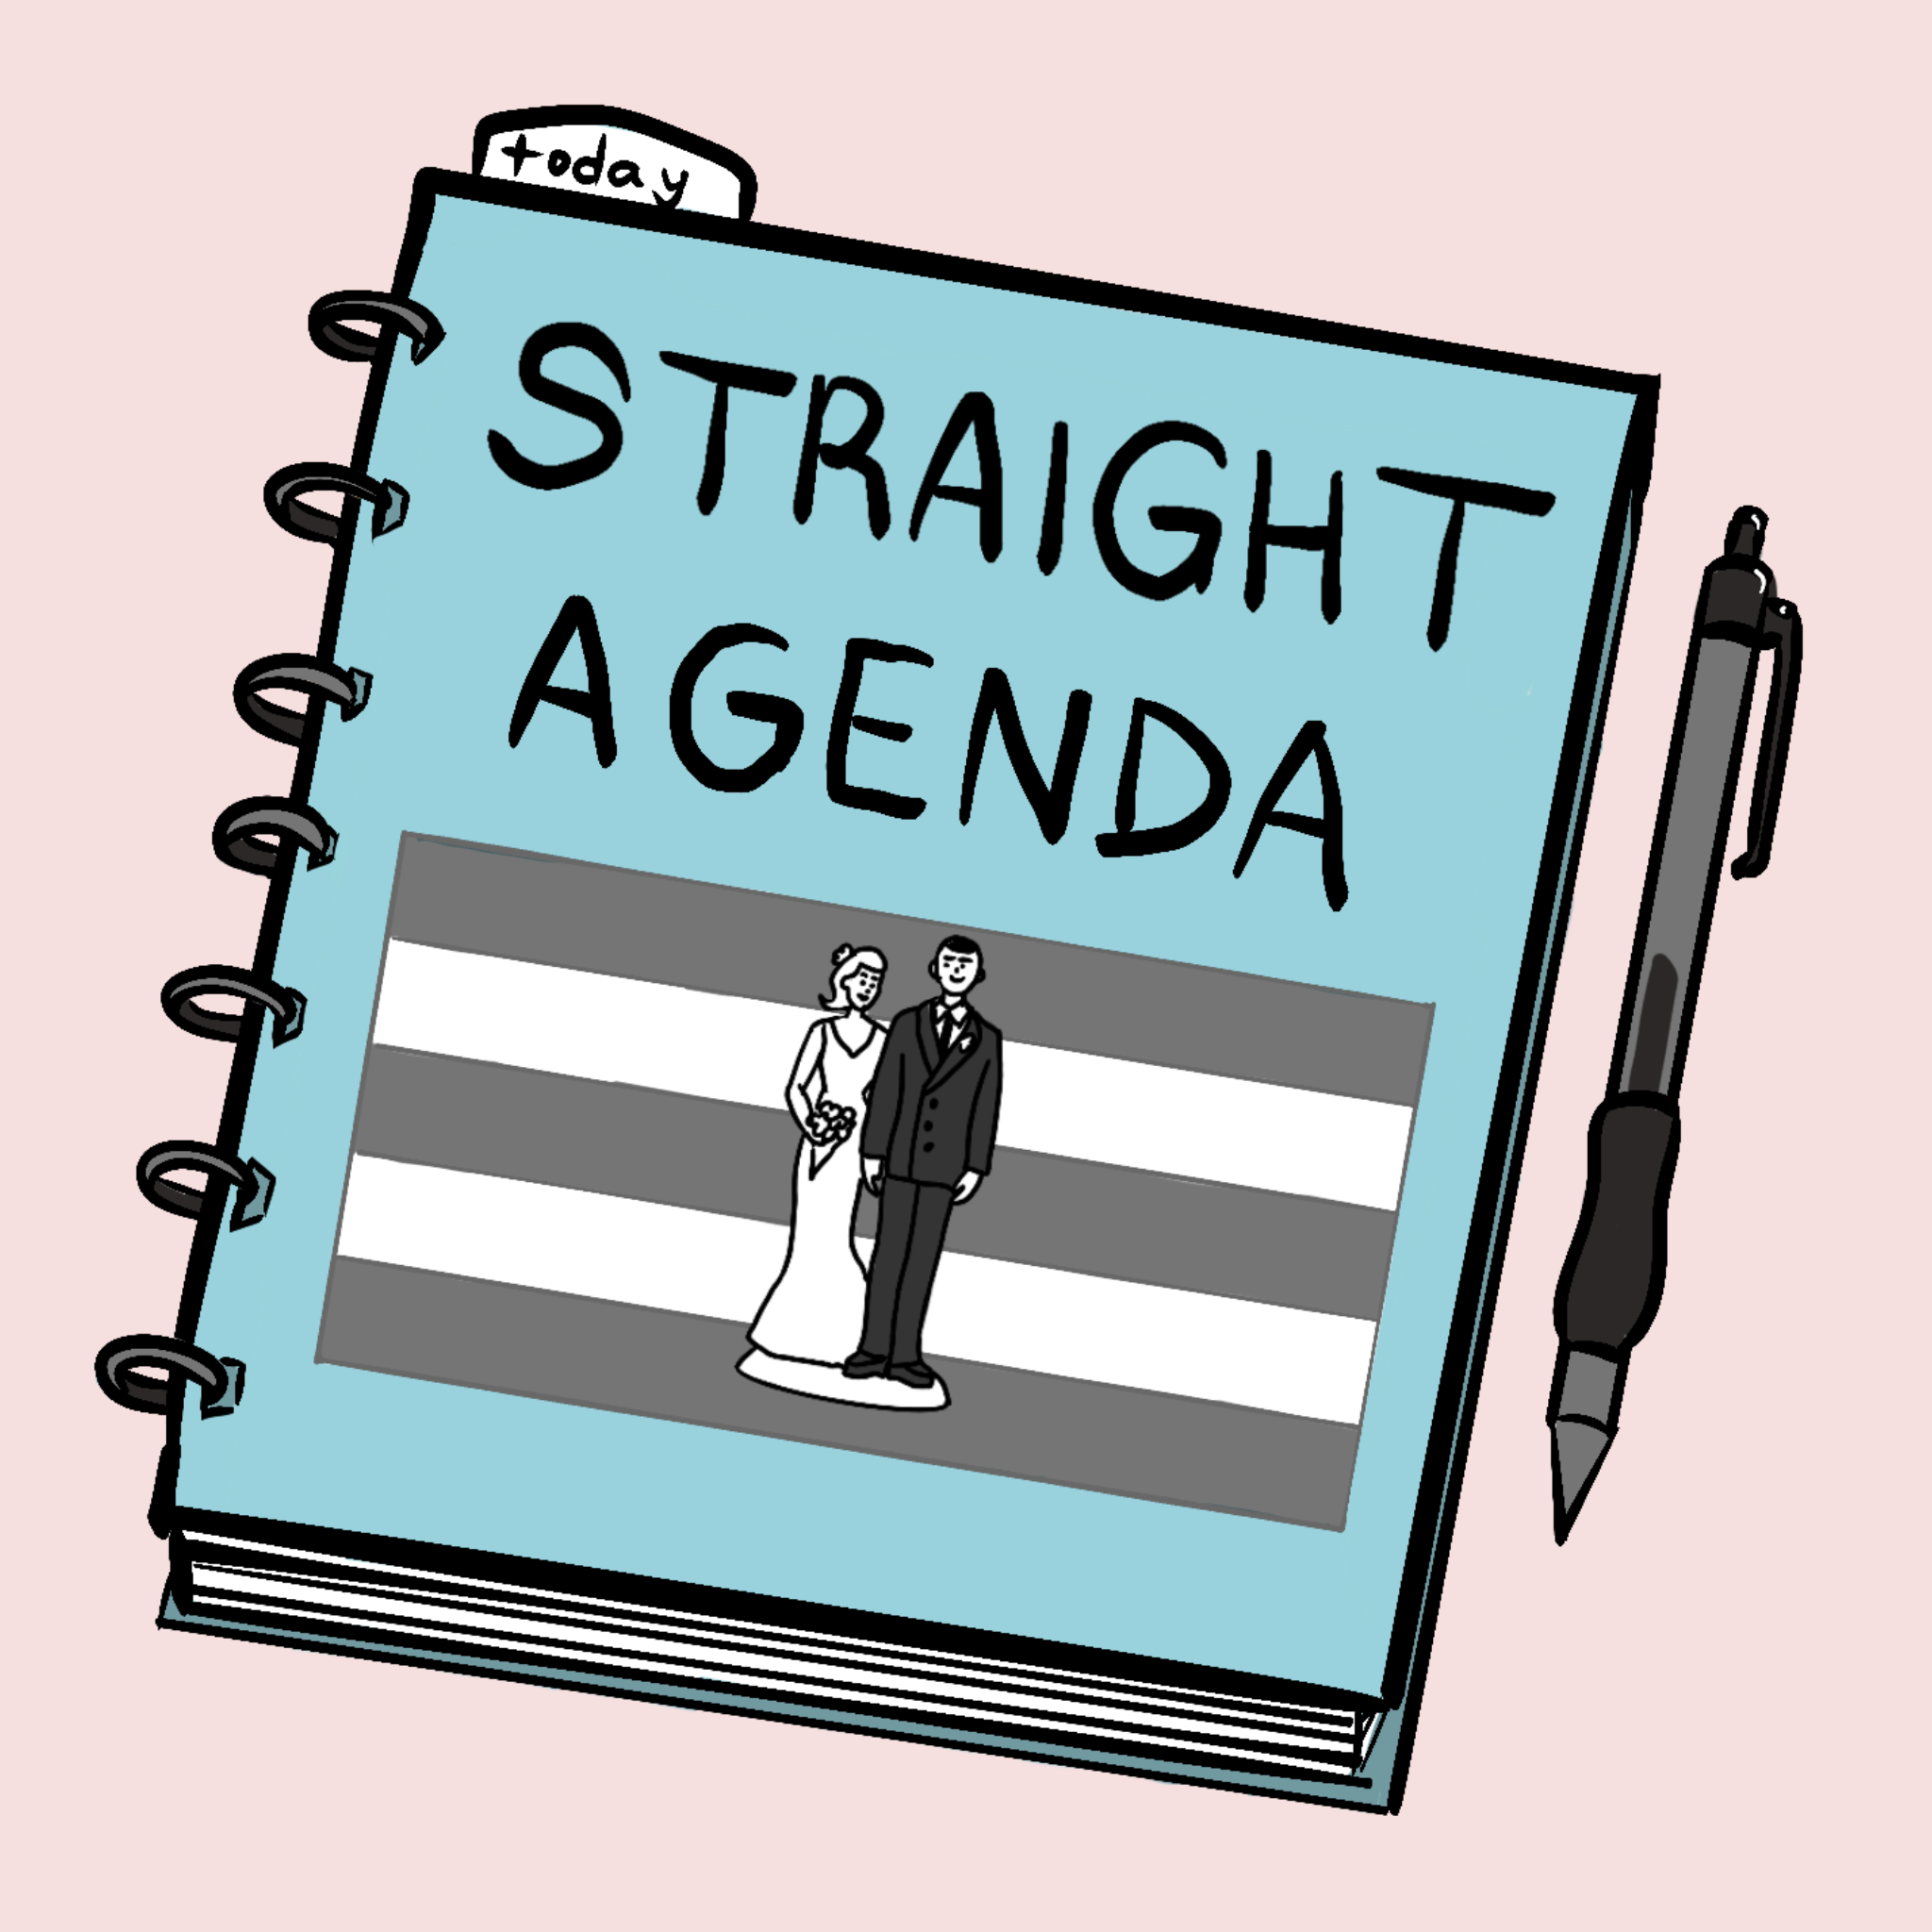 illustration of a spiral bound calendar titled The Straight Agenda, a photo of a bride and groom featured on the cover